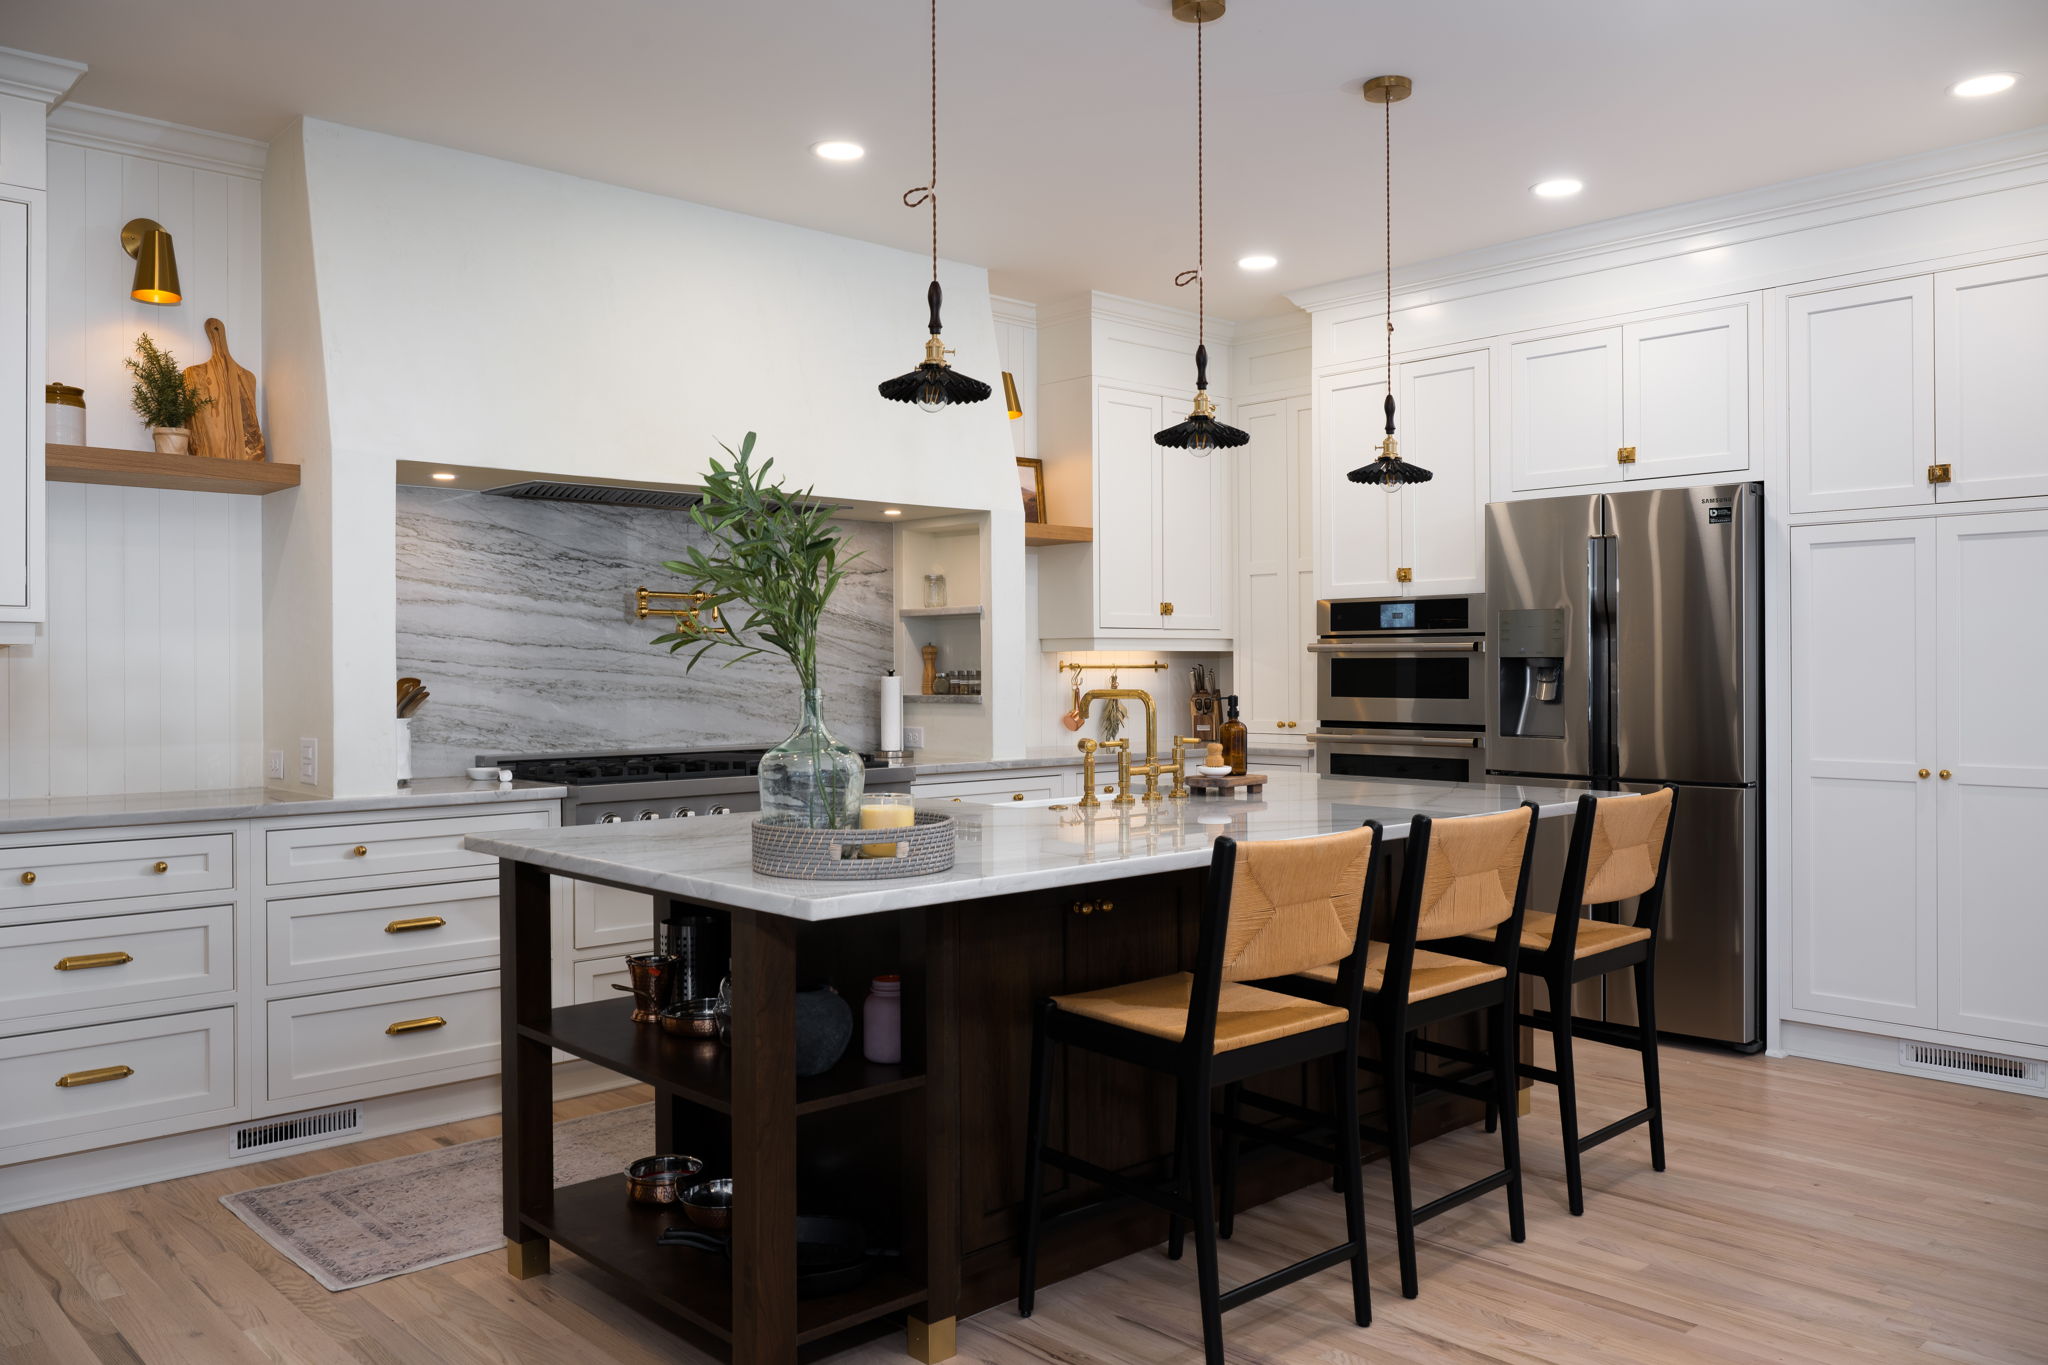 Modern kitchen with white cabinetry, marble backsplash, and a central kitchen island design with bar stools, complemented by pendant lighting and built-in appliances.